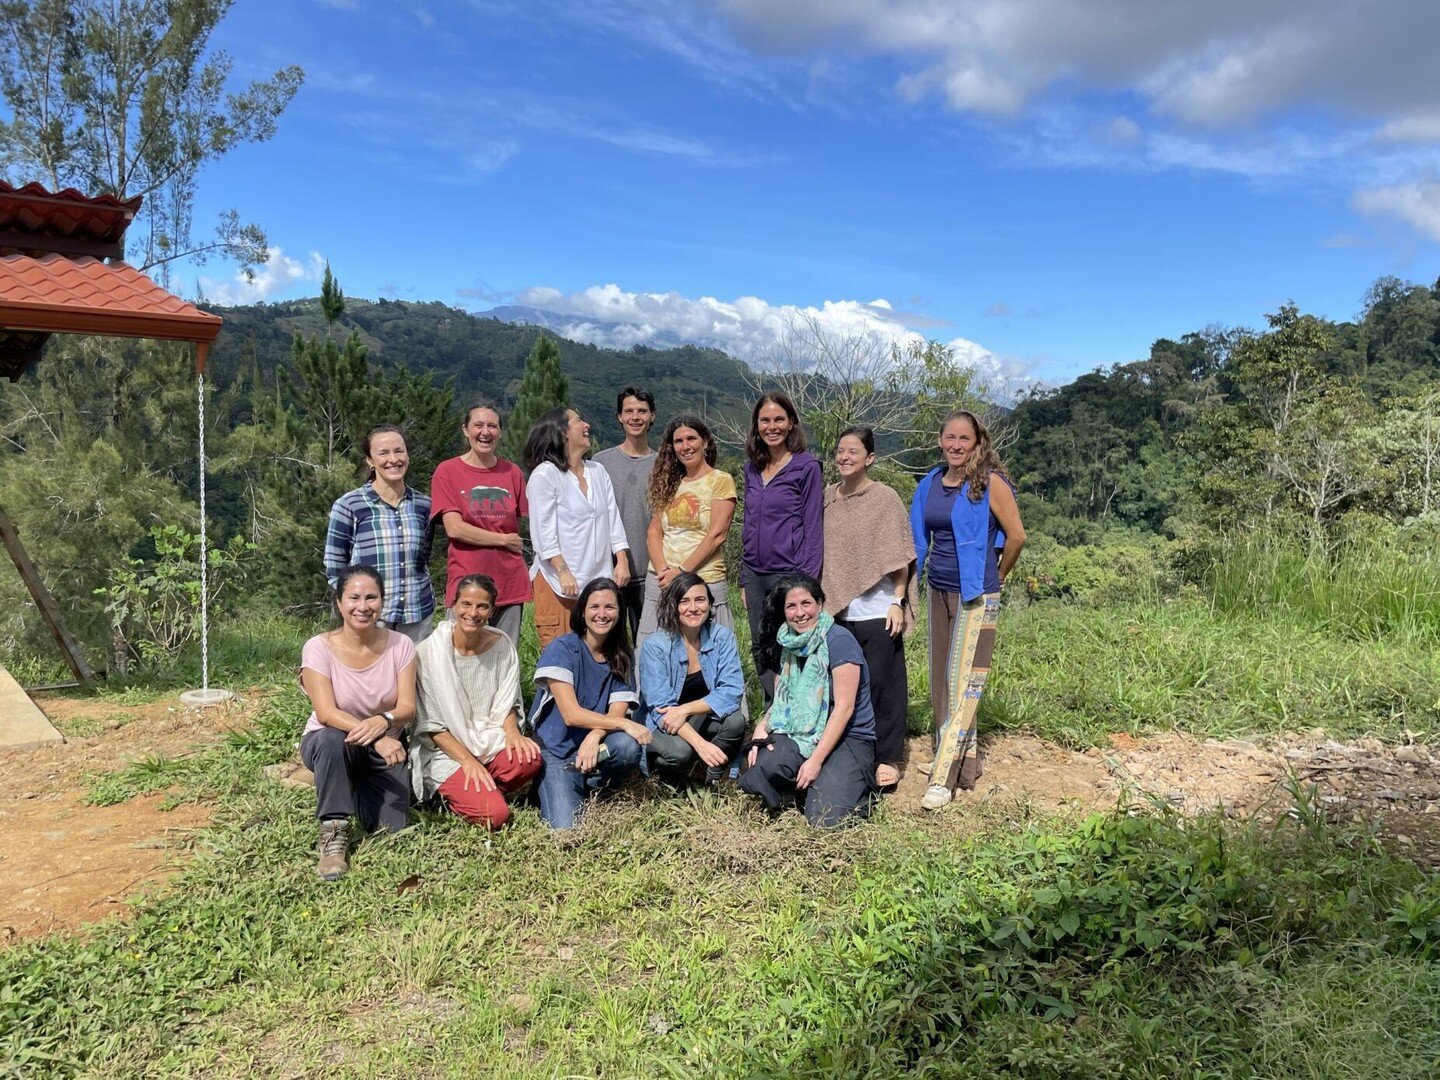 We are excited to announce that the new Costa Rica (VCR) center recently held its first inaugural three-day course for 11 female participants! VCR began construction 7 months ago. And this is such a historic moment to have their first multi-course ev